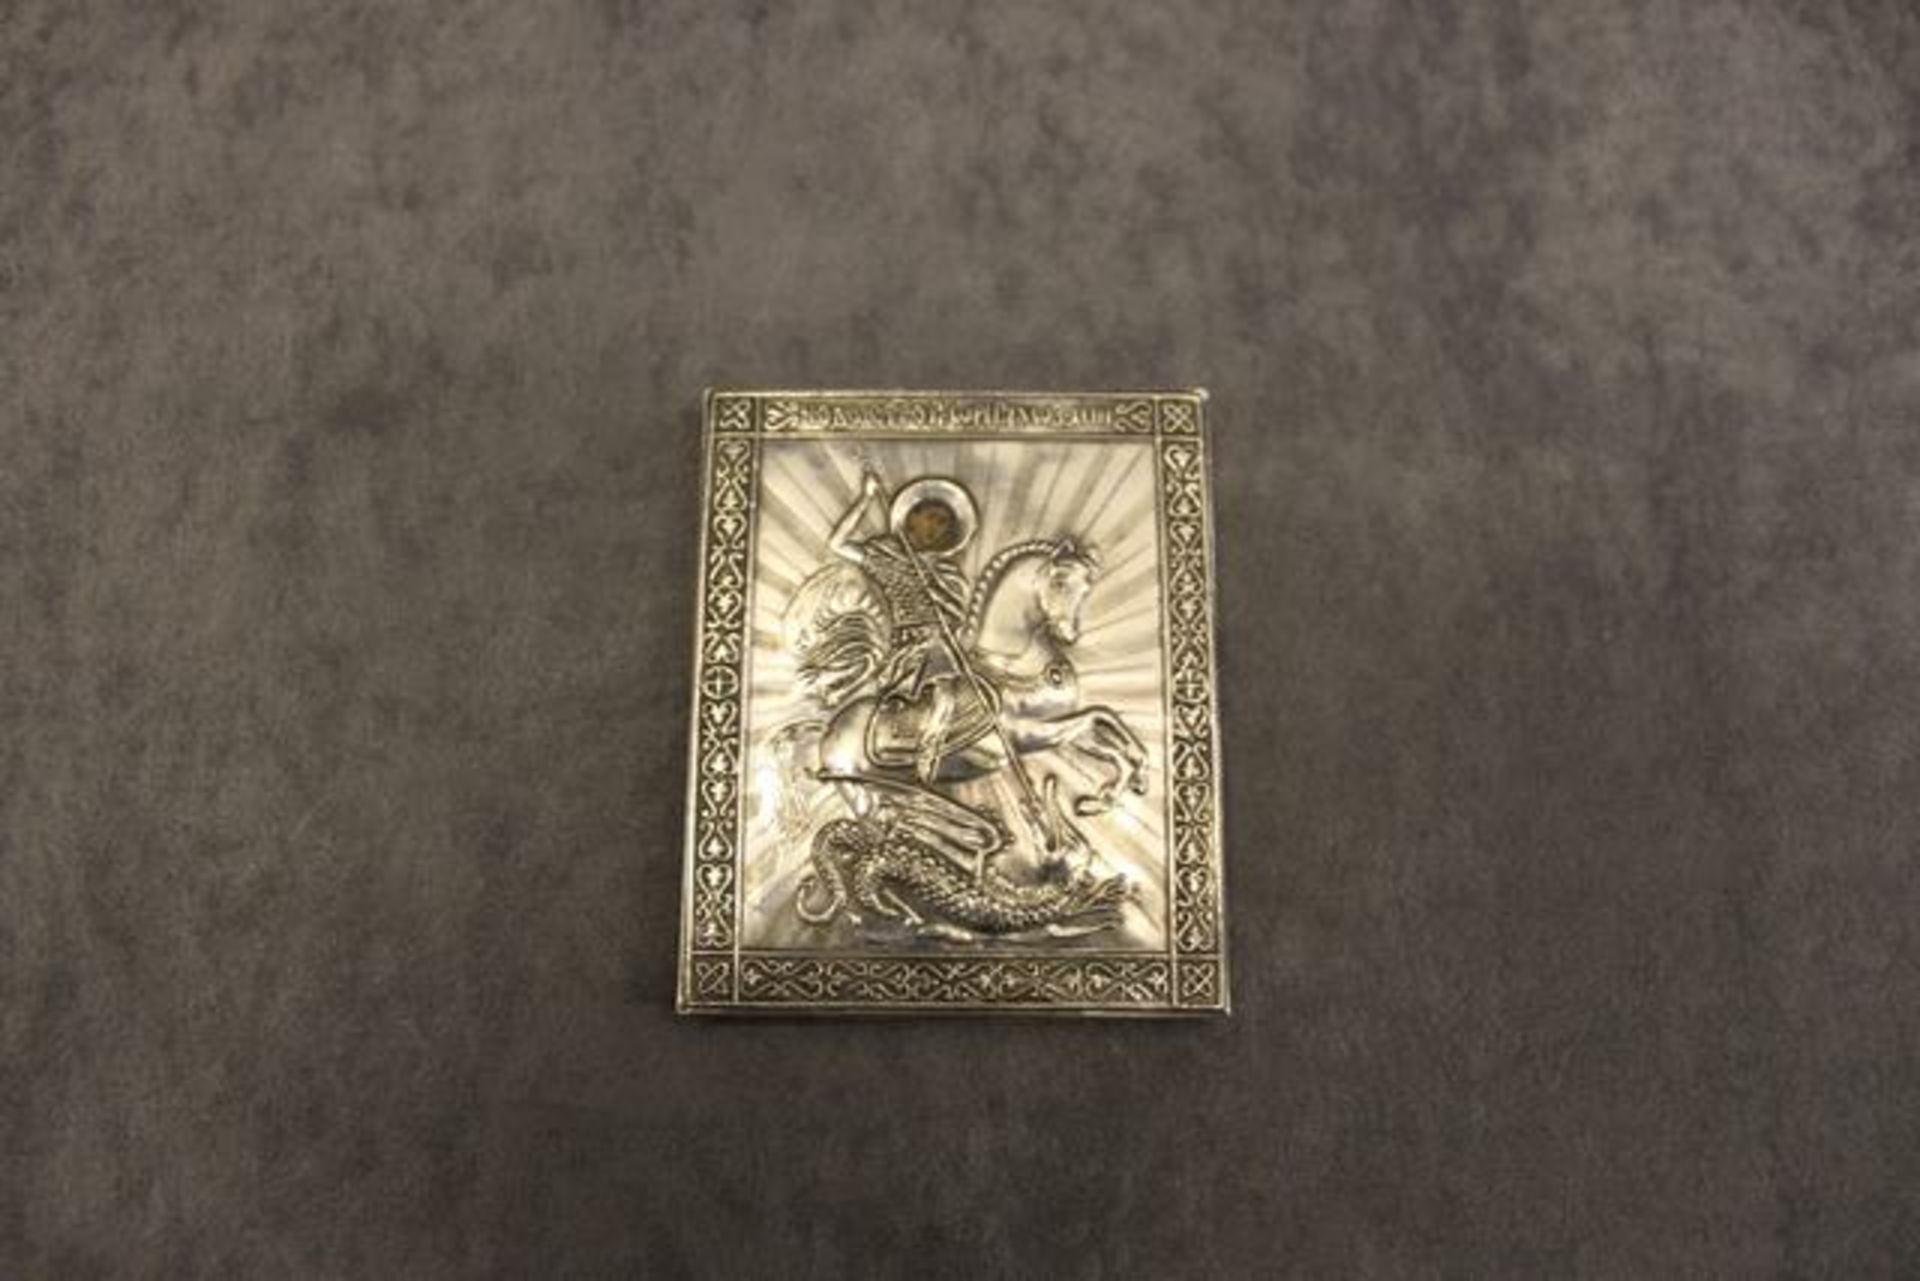 Russian  Silver 84 icon of St George slaying the dragon,   1890 assay mark of Aleksandr Timofeyevich